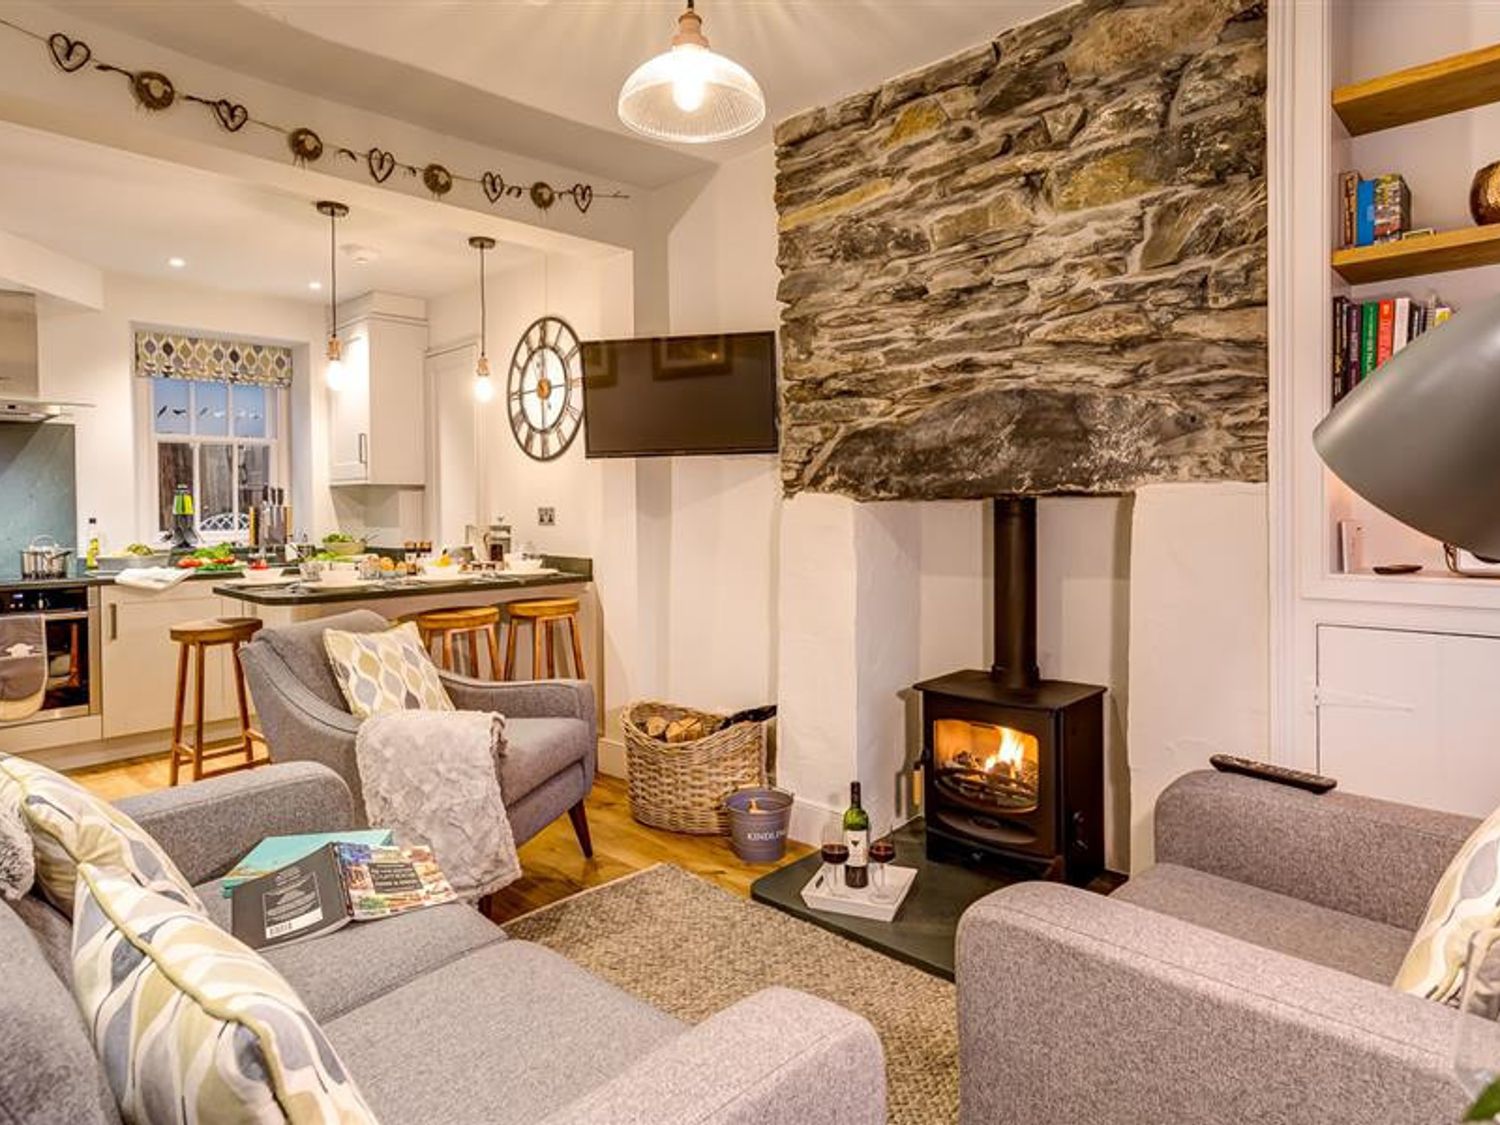 Cosy Cottage - Lake District - 1041554 - photo 1